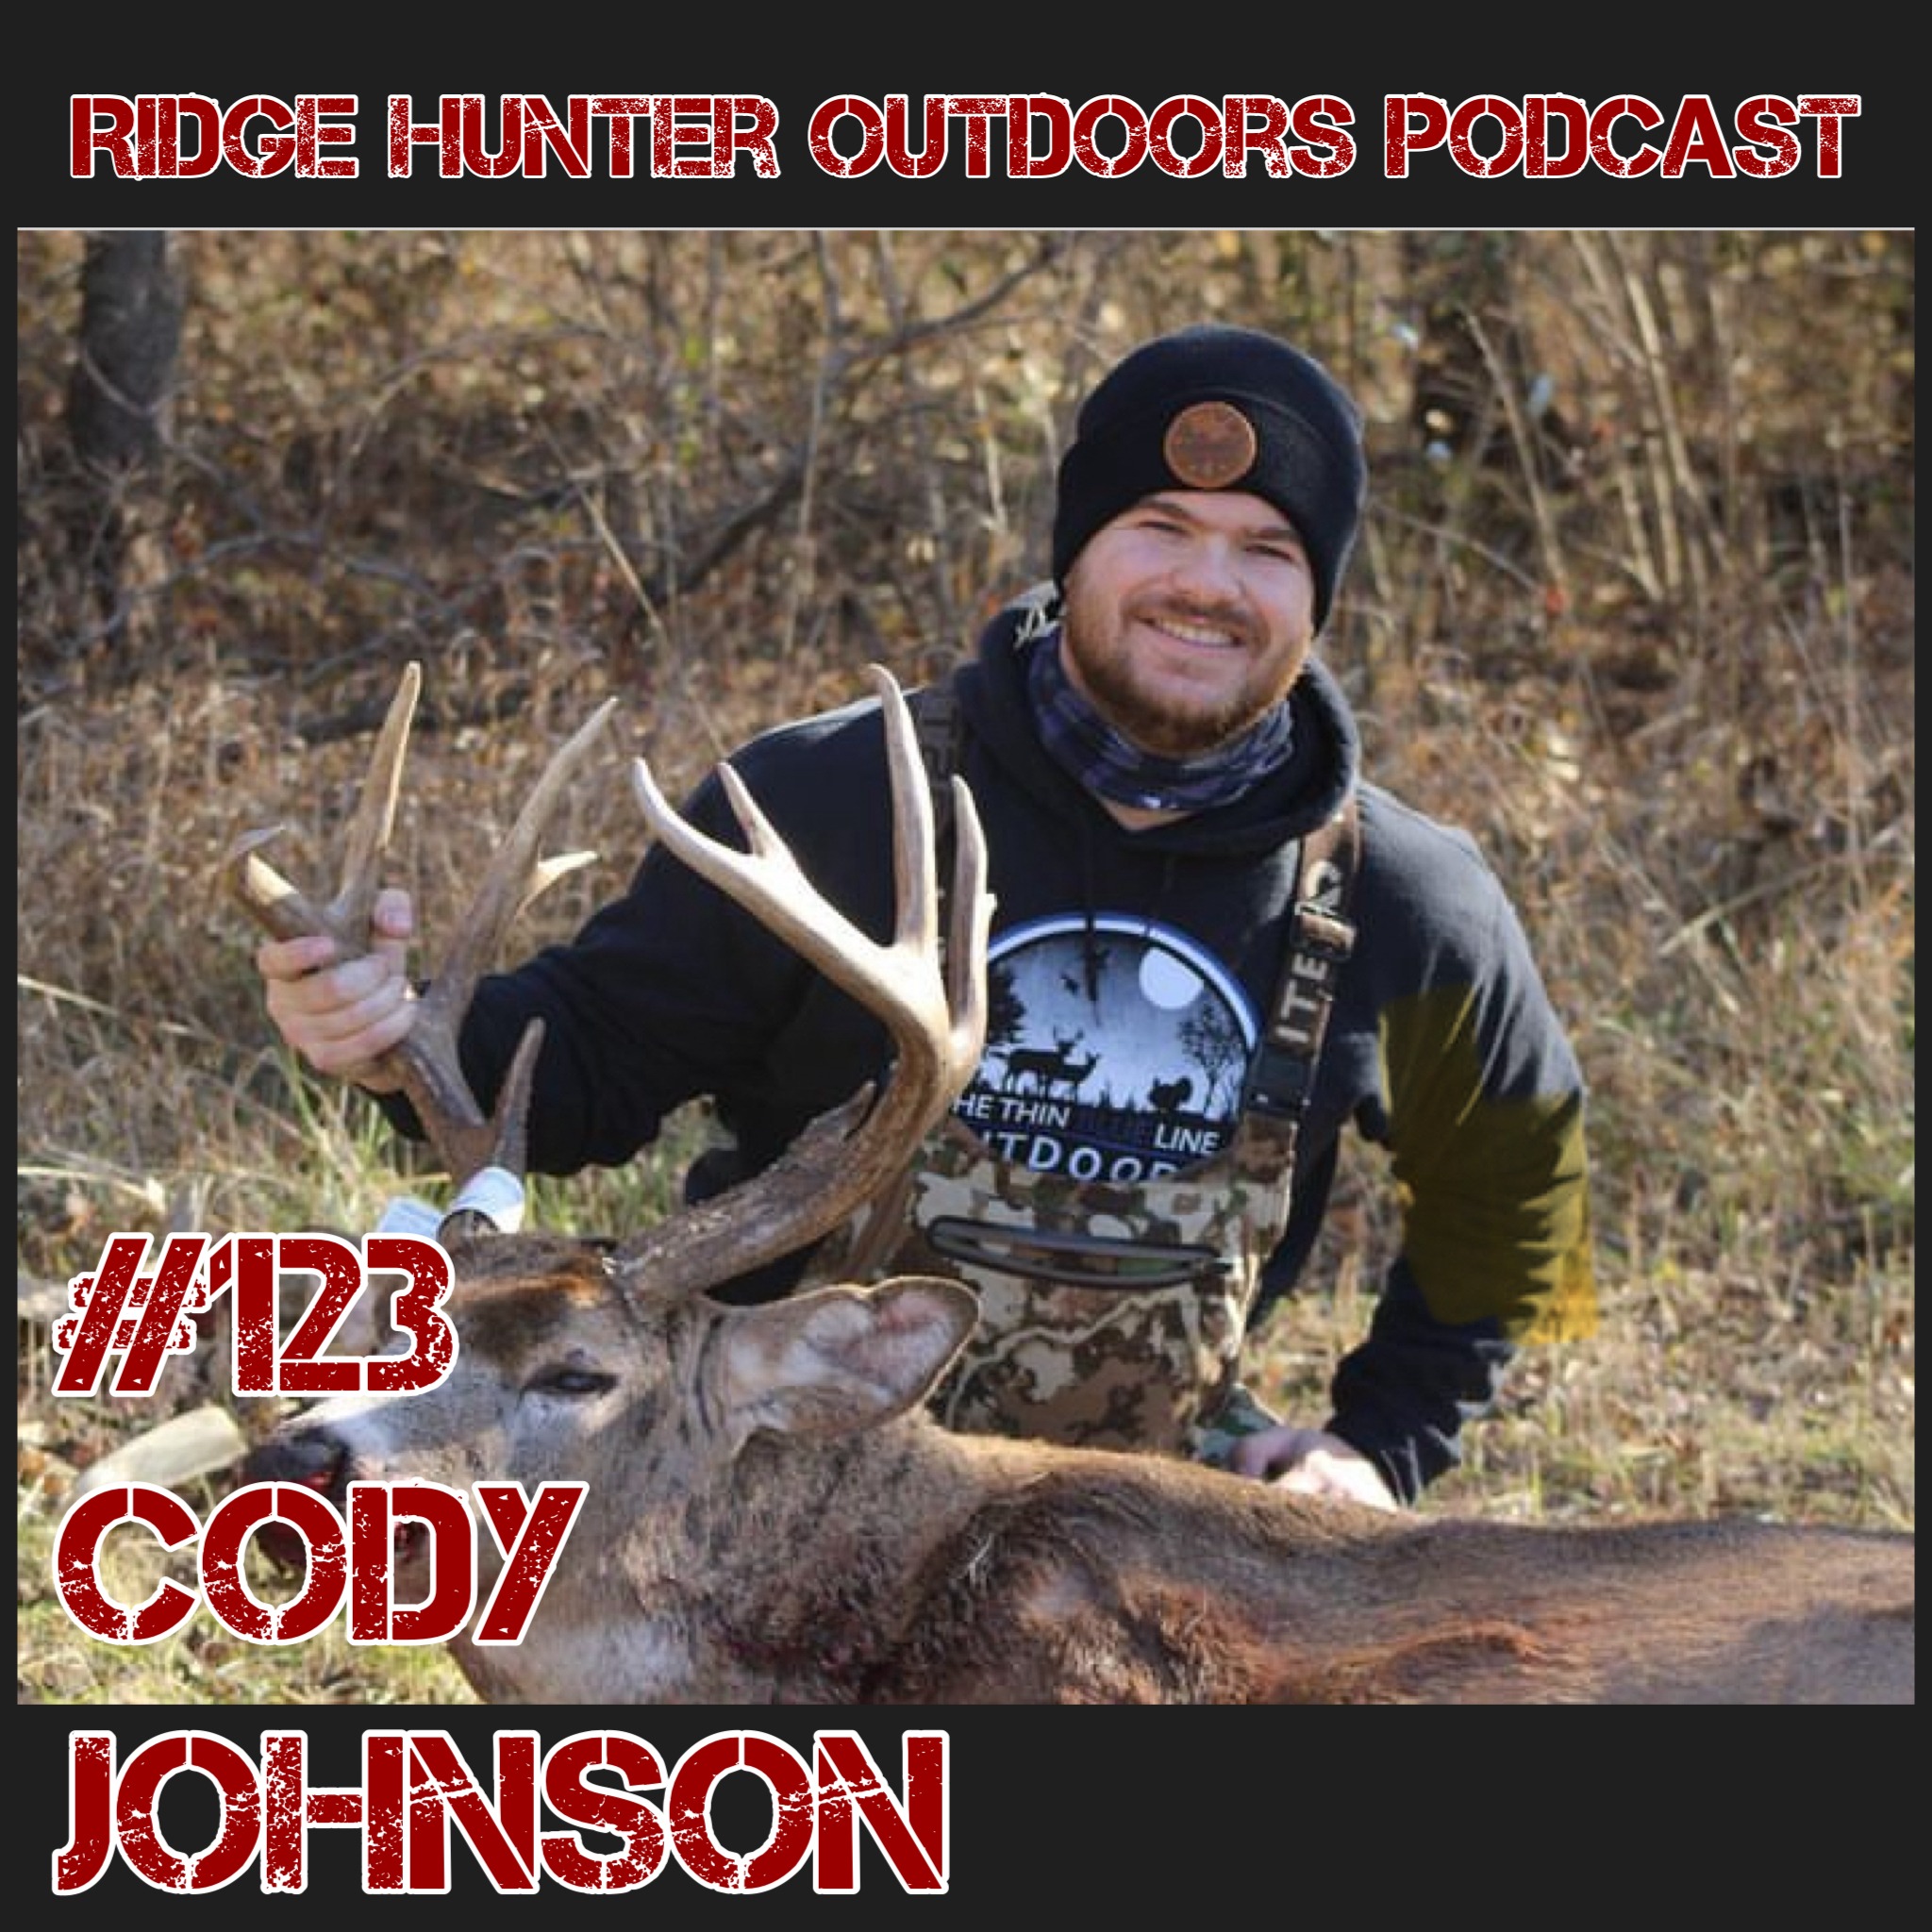 Cody Johnson from The Thin Blue Line Outdoors | RHO Podcast #123